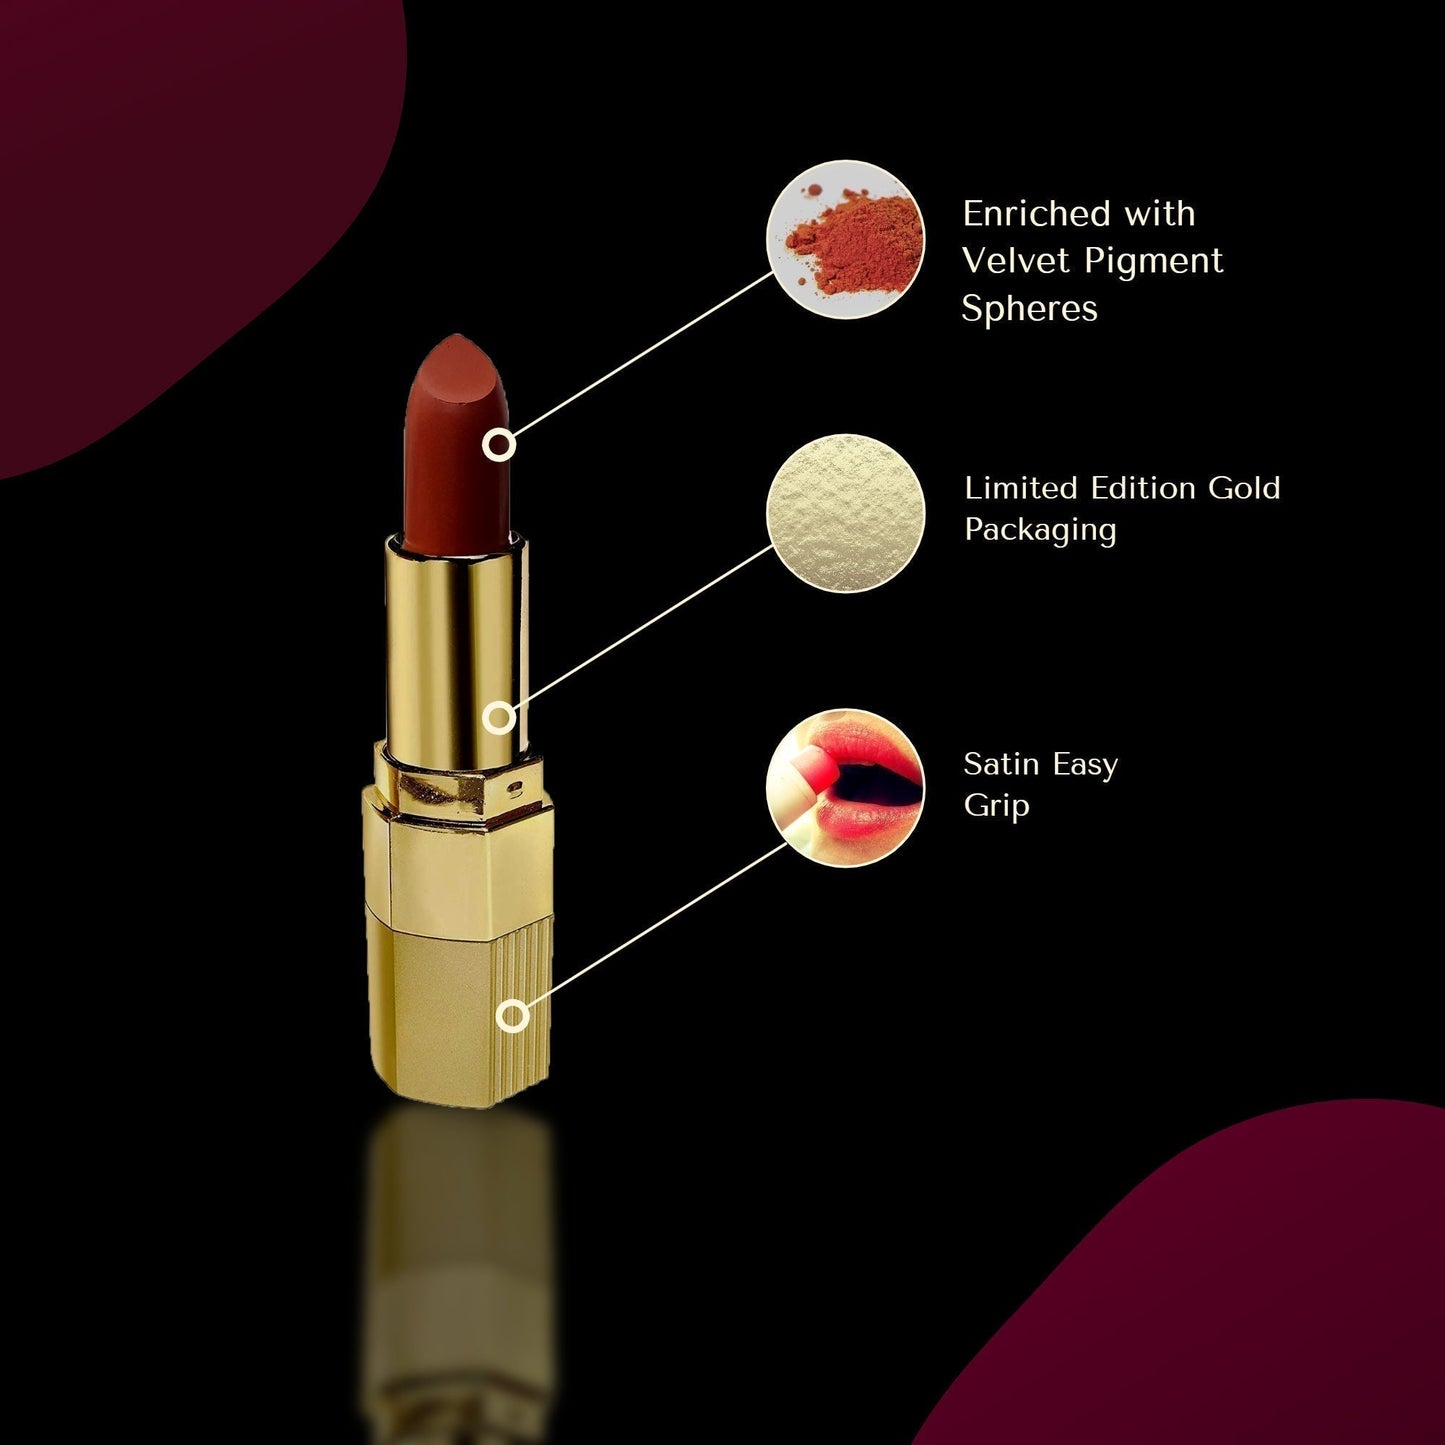 Krayons Desire Lipstick, Highly Pigmented, Longlasting, 3.5g Each, Combo, Pack of 3 (Caramel Brown, Magic Pink, Nude Caramel)